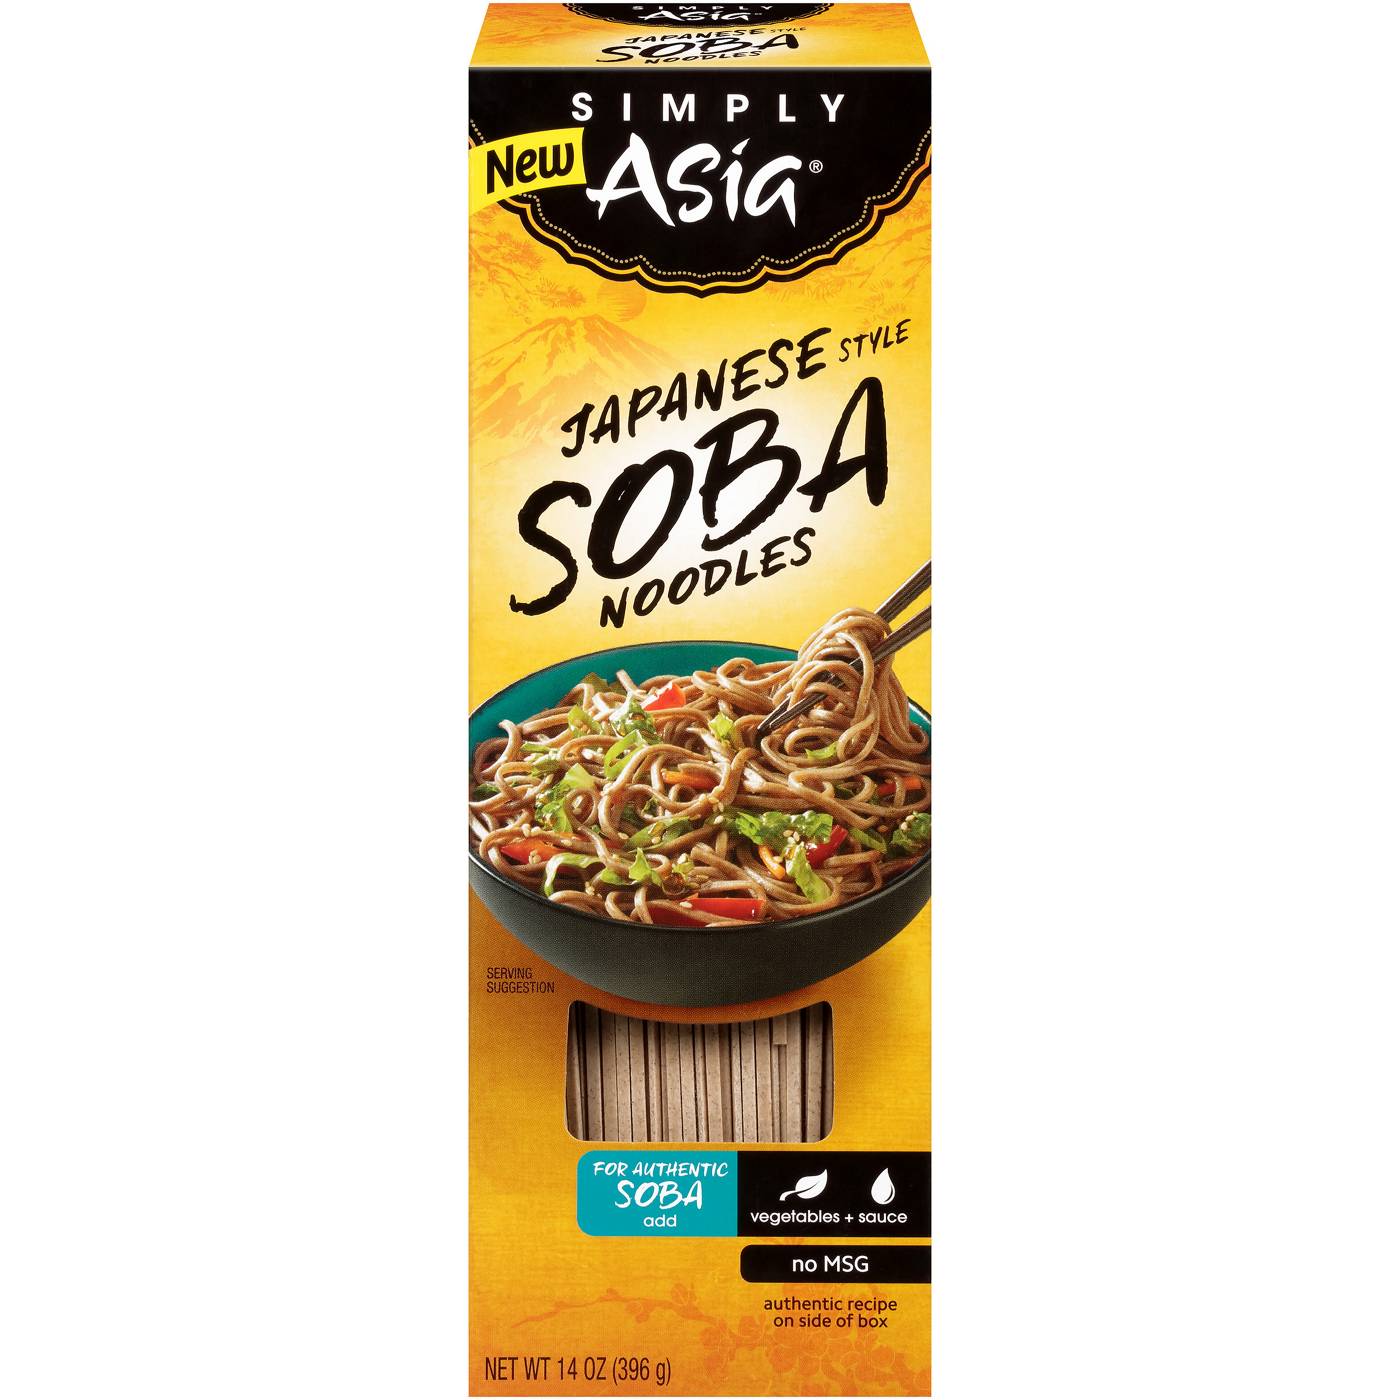 Simply Asia Japanese Style Soba Noodles; image 1 of 9